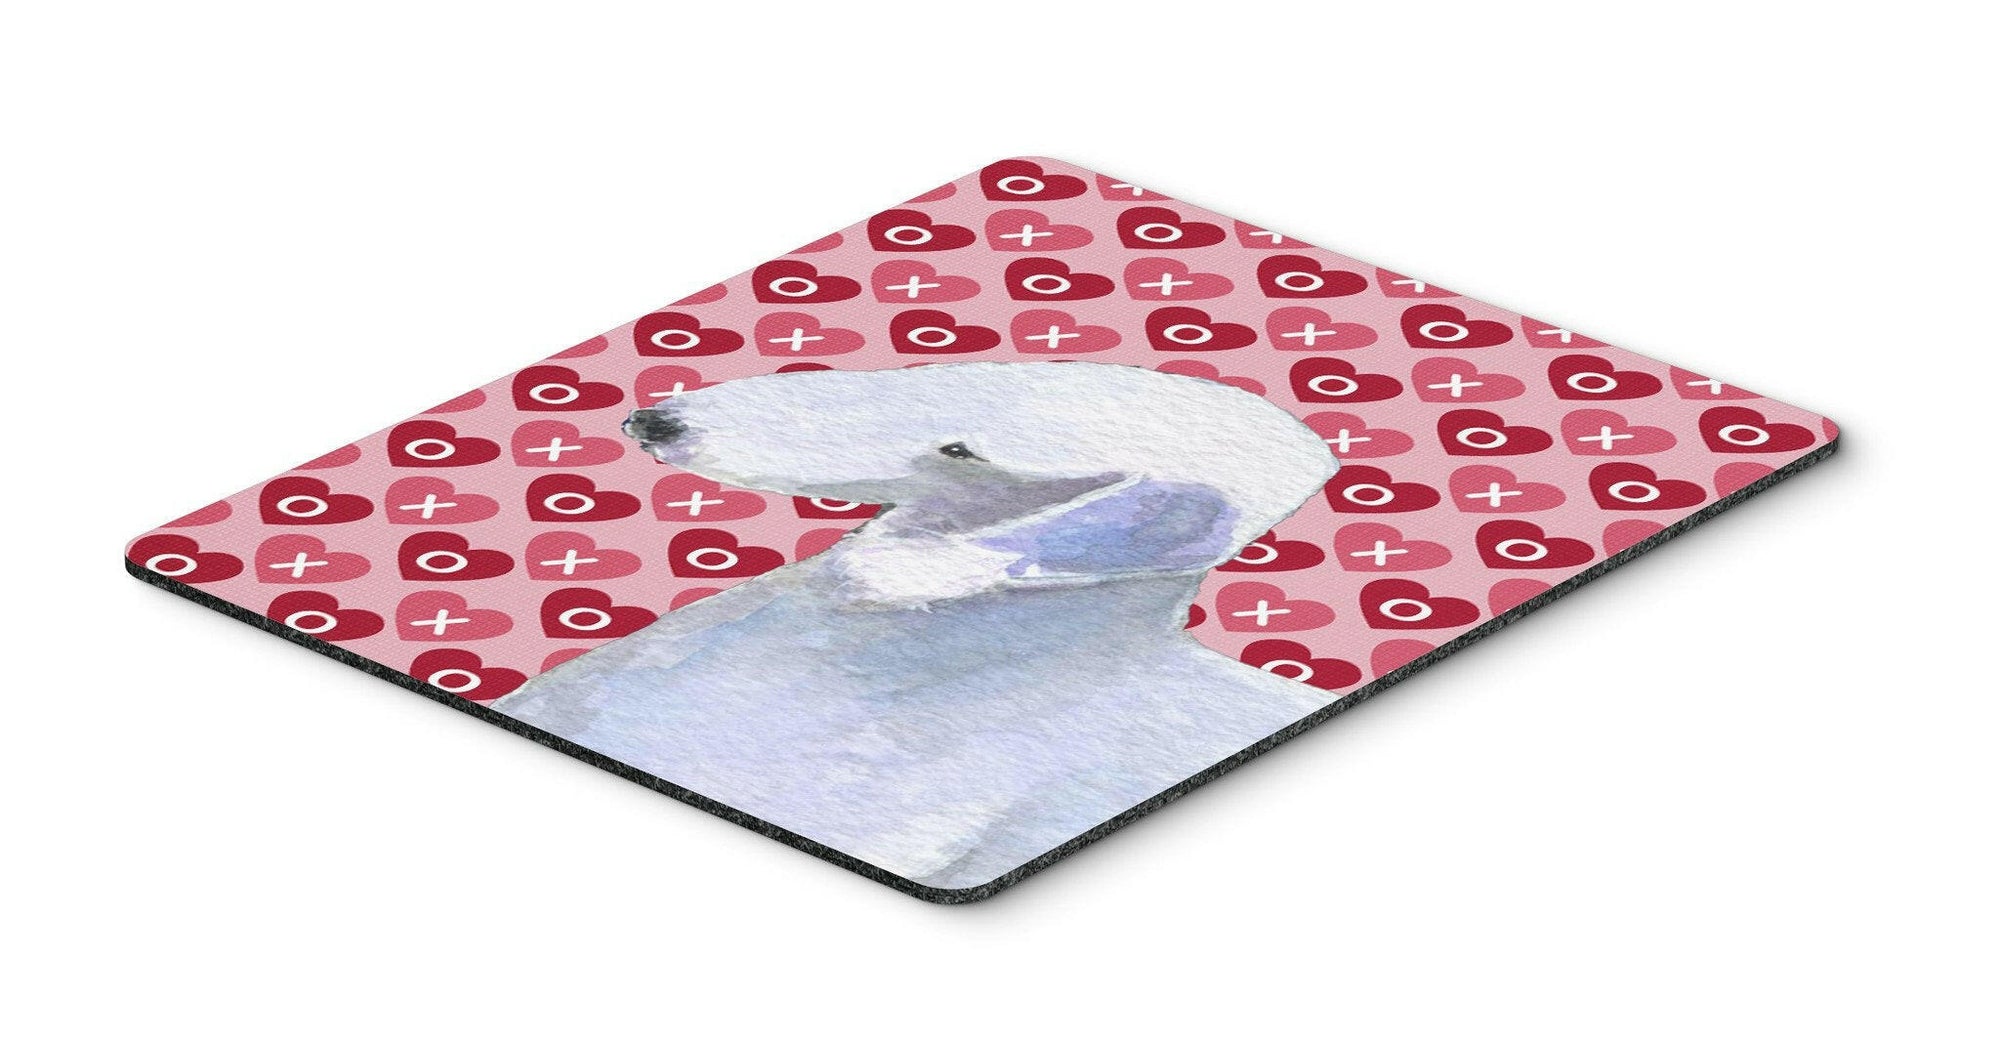 Bedlington Terrier Hearts Love and Valentine's Day Mouse Pad, Hot Pad or Trivet by Caroline's Treasures